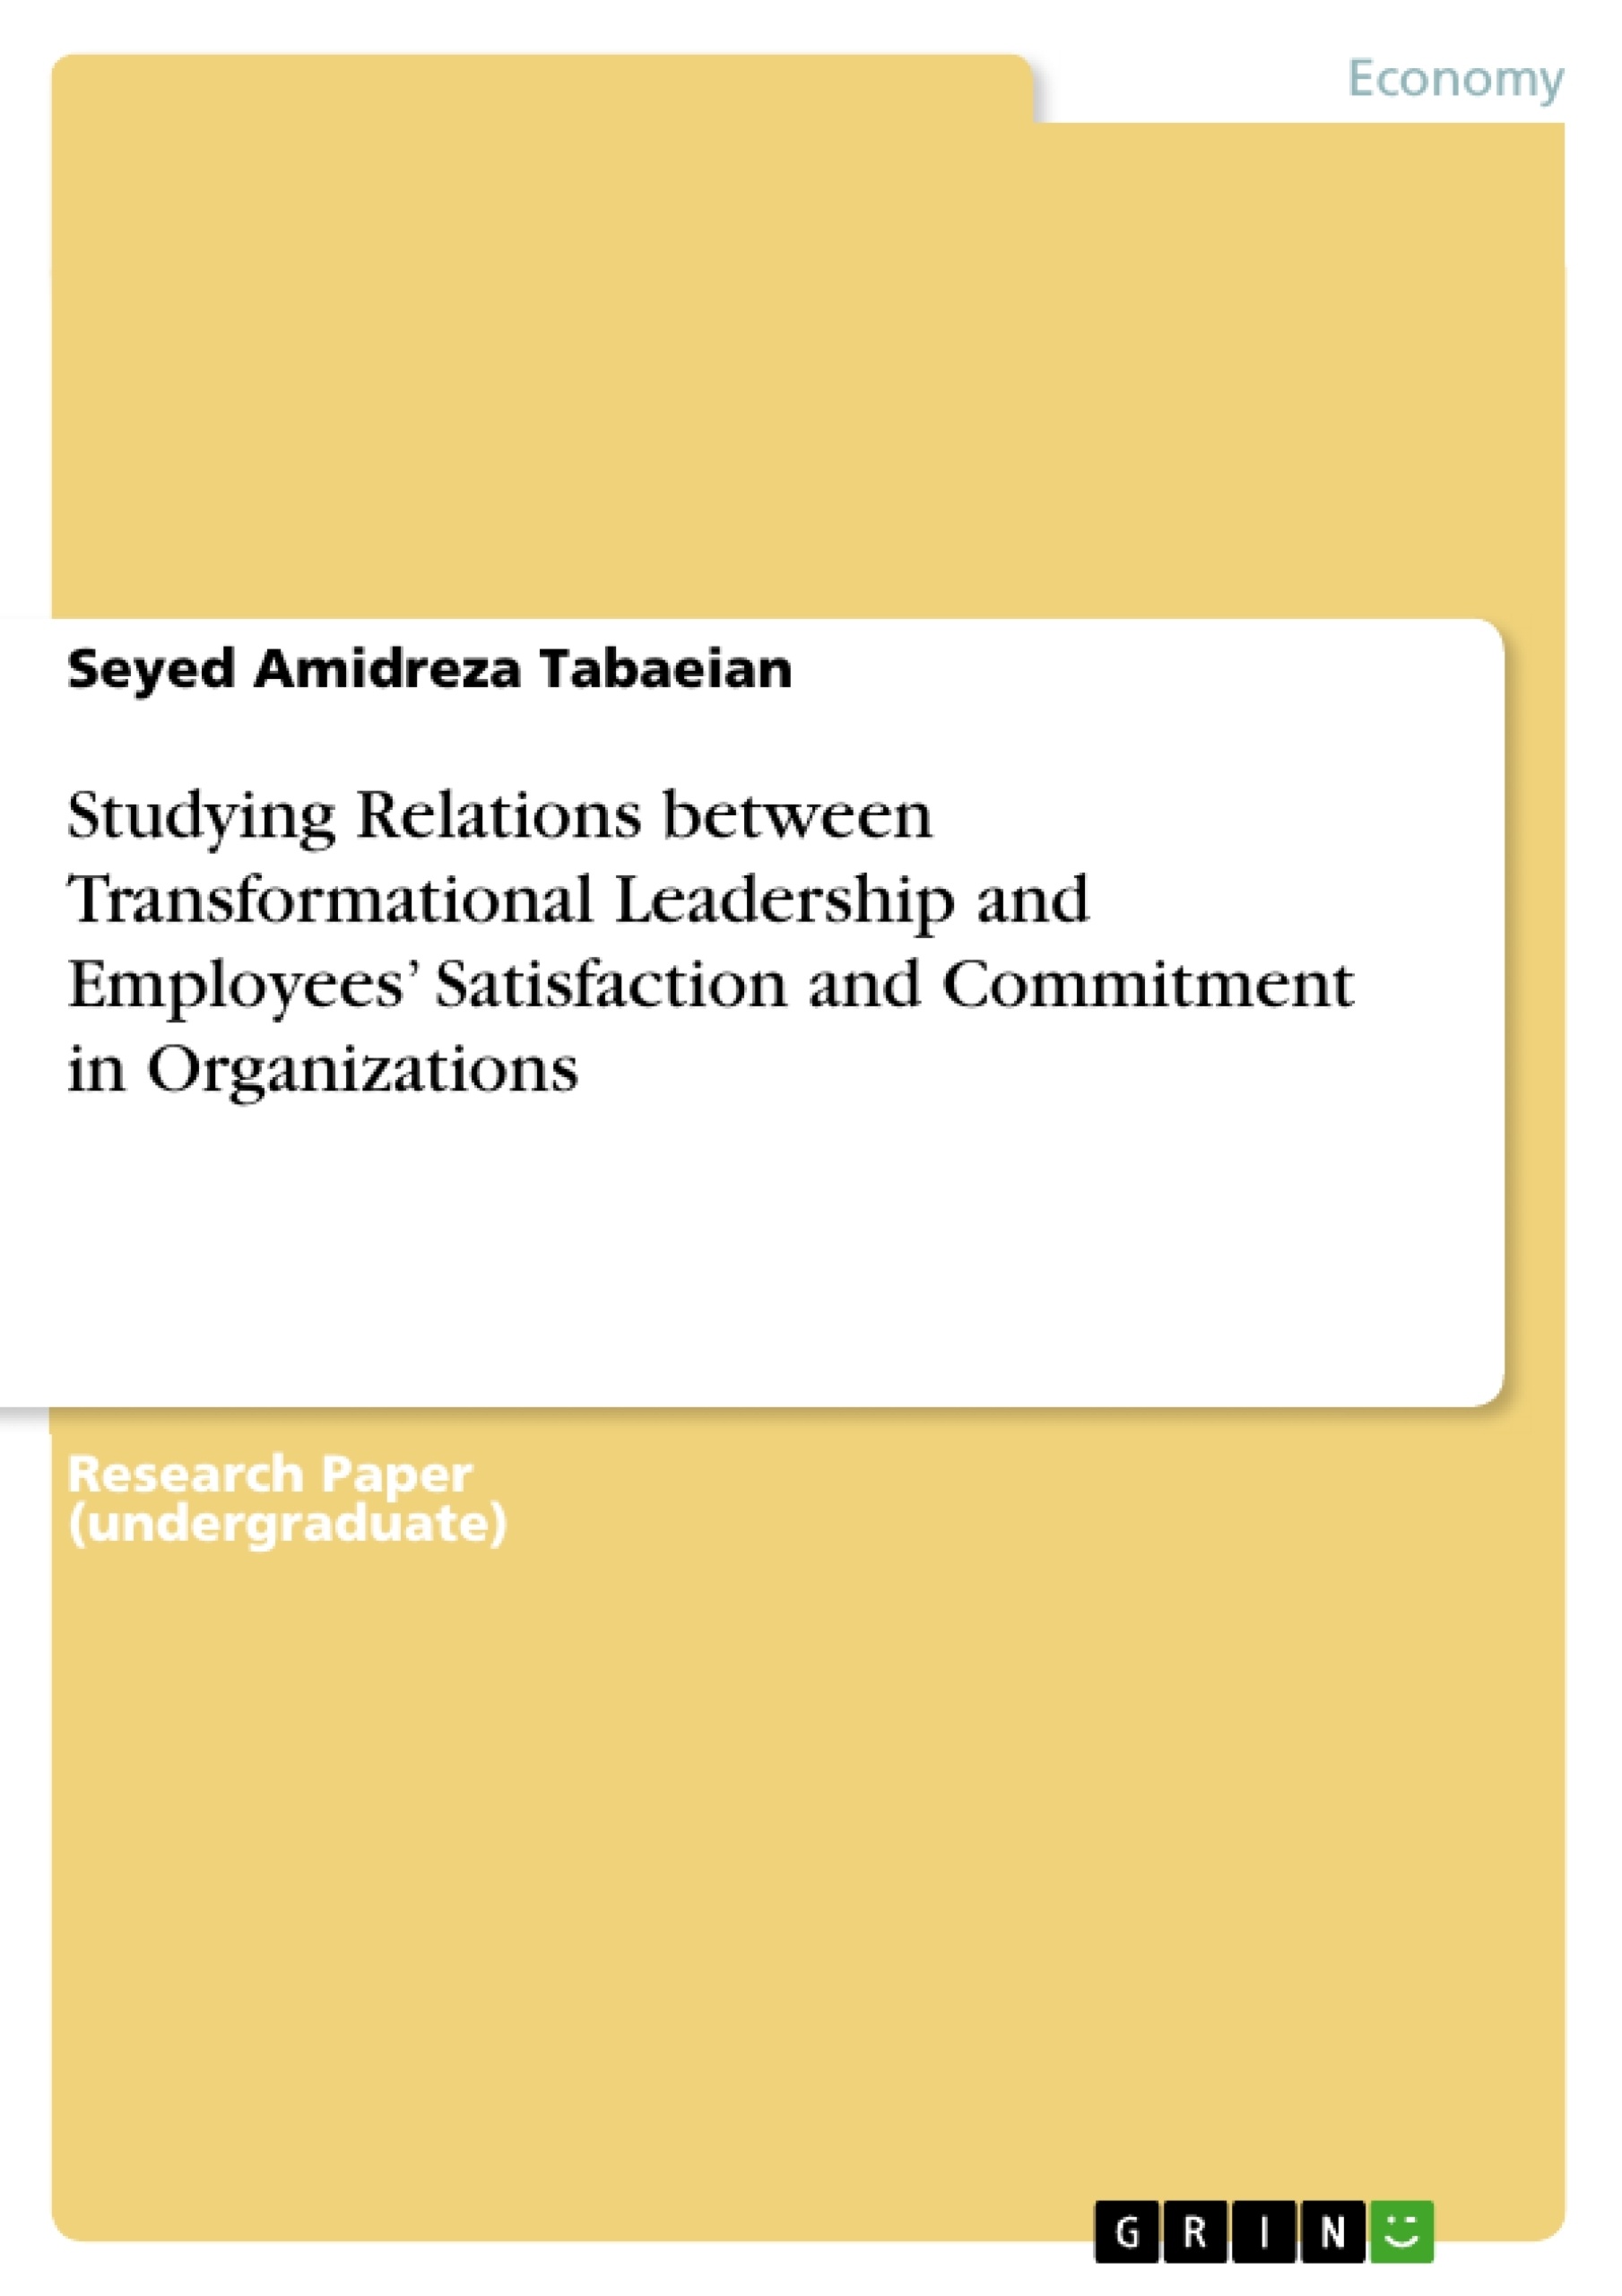 Title: Studying Relations between Transformational Leadership and Employees’ Satisfaction and Commitment in Organizations